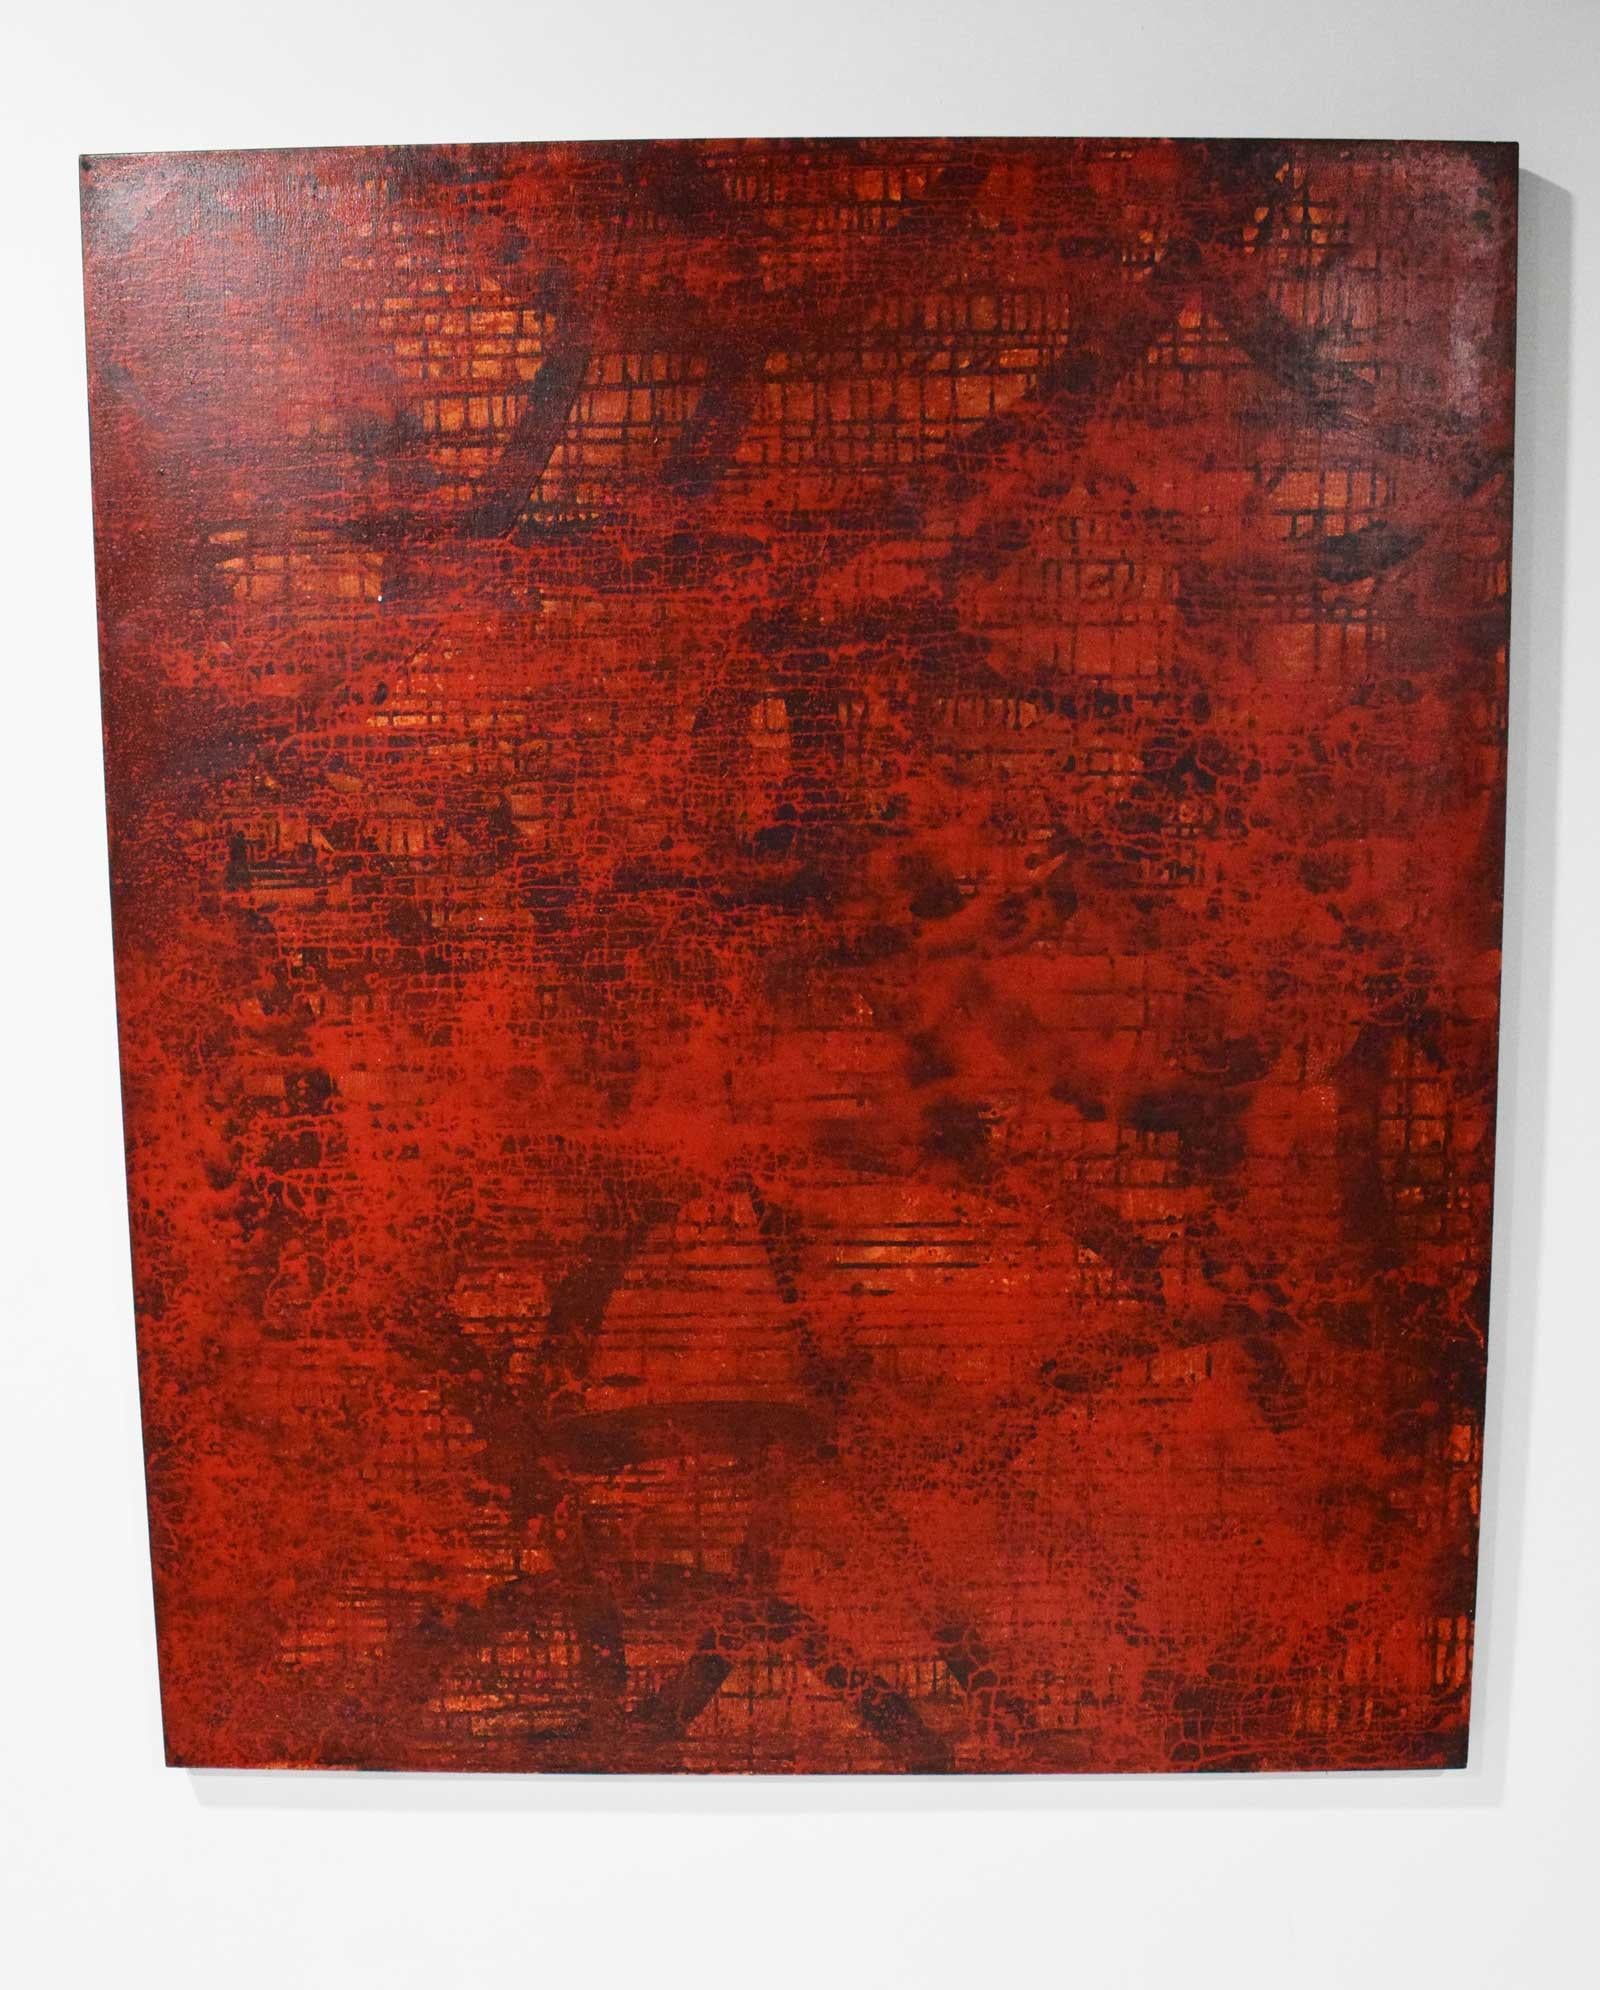 A large scale painting by Ron Strong, acrylic paint, shellac and emulsion. On canvas. Originally sold through Galleria Sillechia in Florida for $9,500.